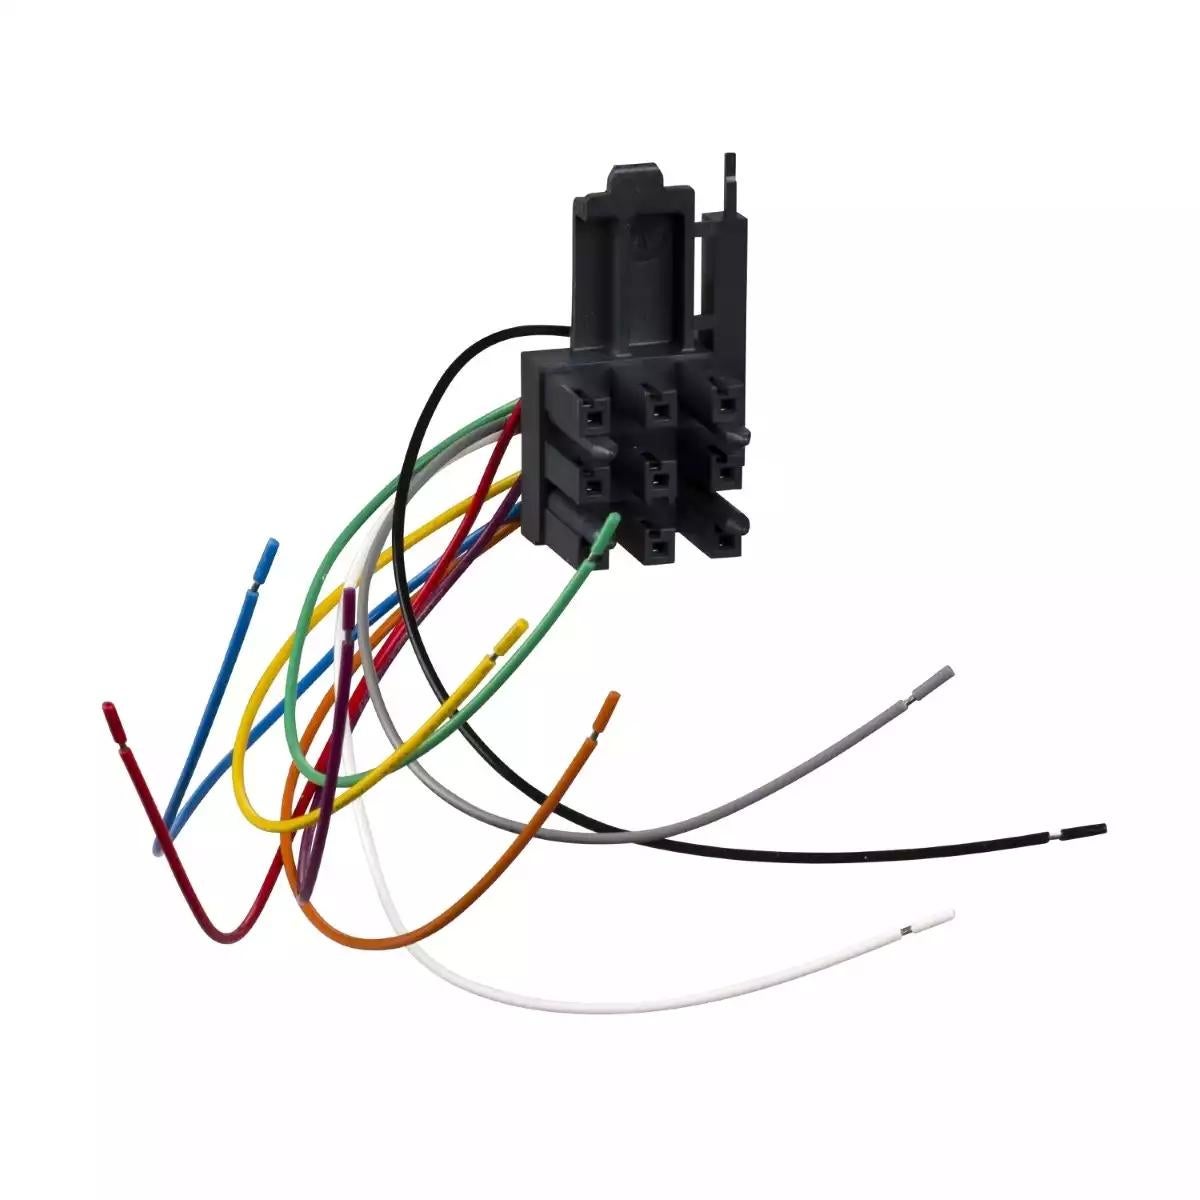 1X 9 WIRE MOVING CONNECTOR FOR BREAKER